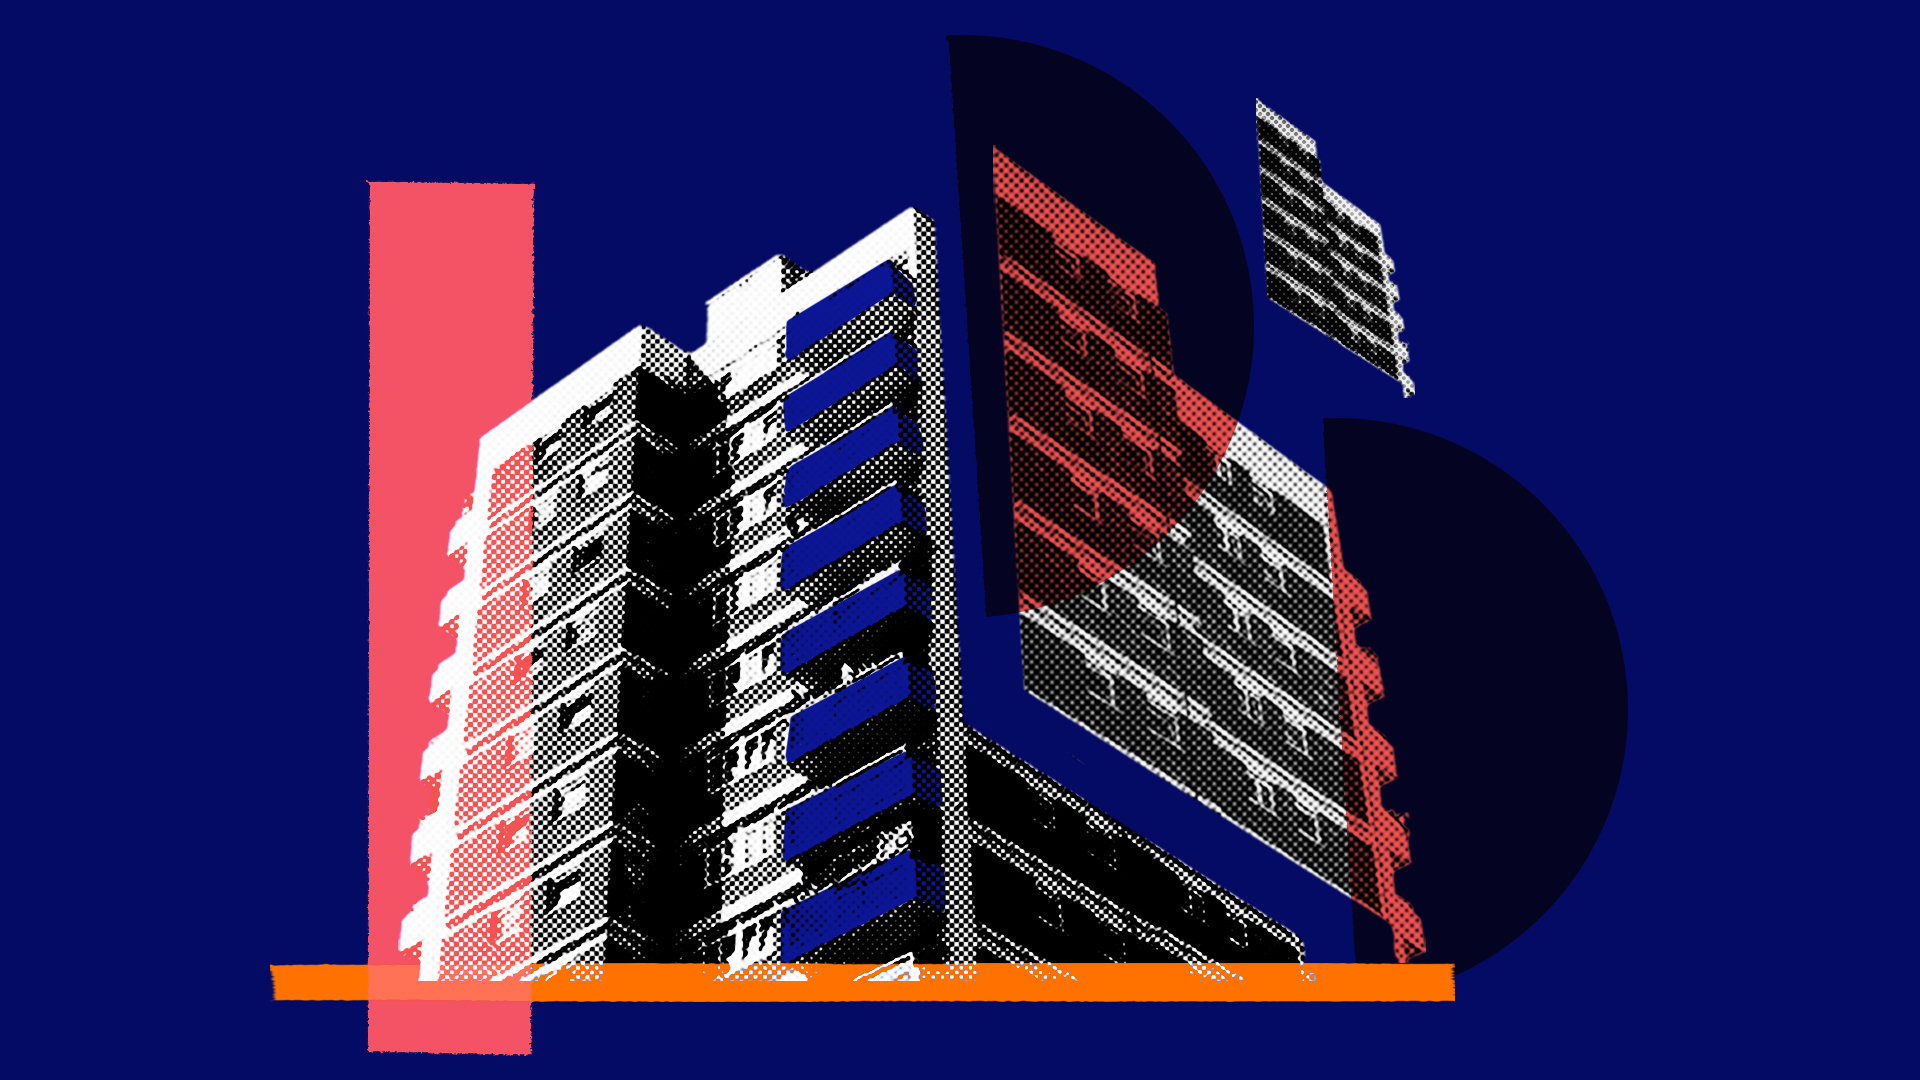 Collage of high rise building overlaid with geometric shapes